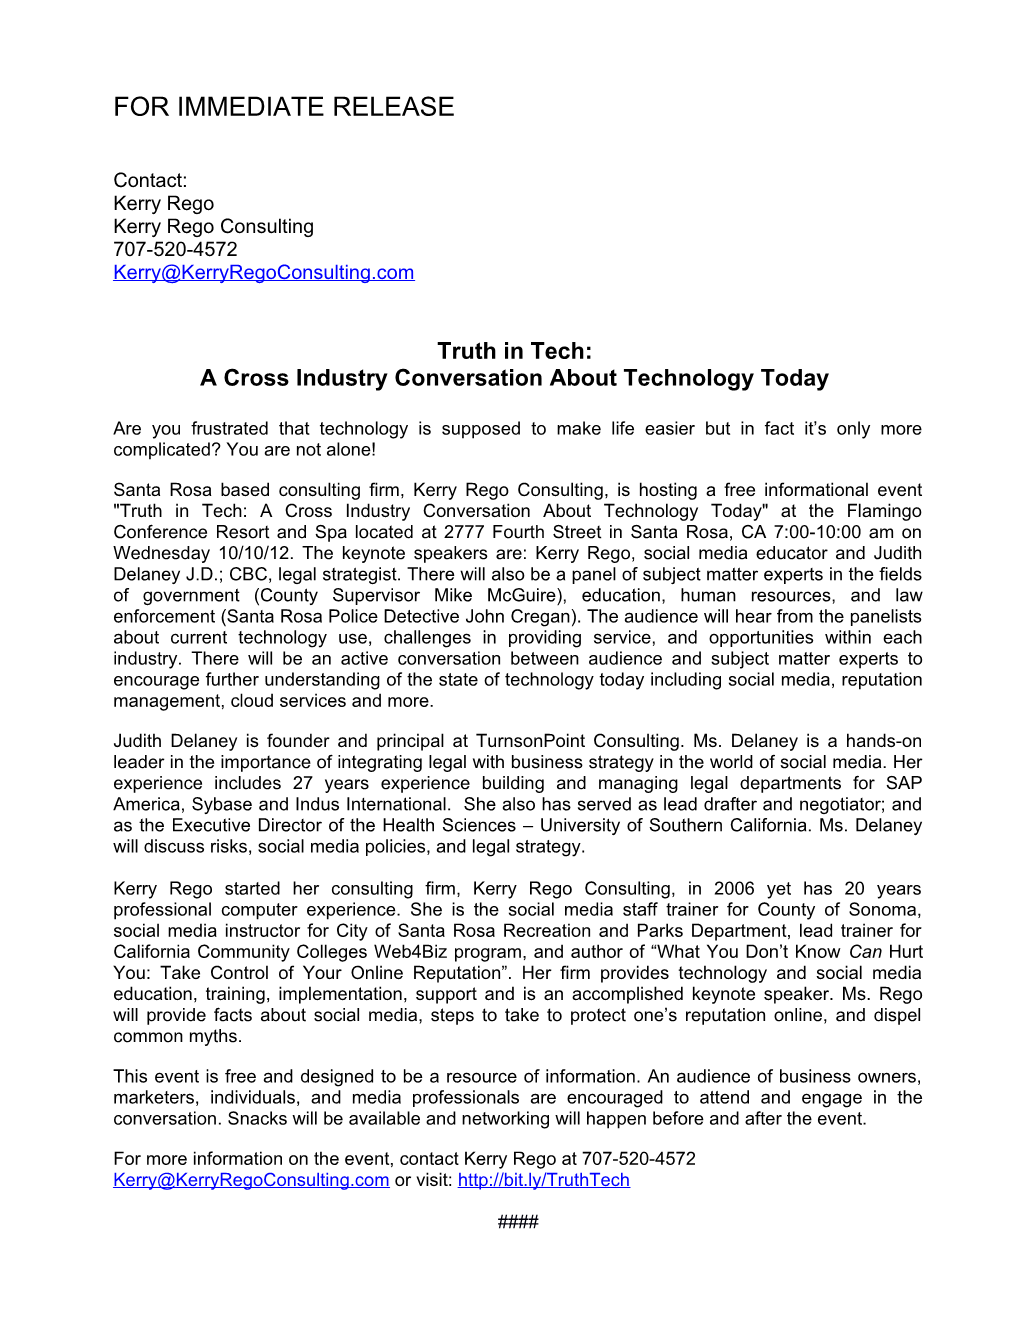 A Cross Industry Conversation About Technology Today